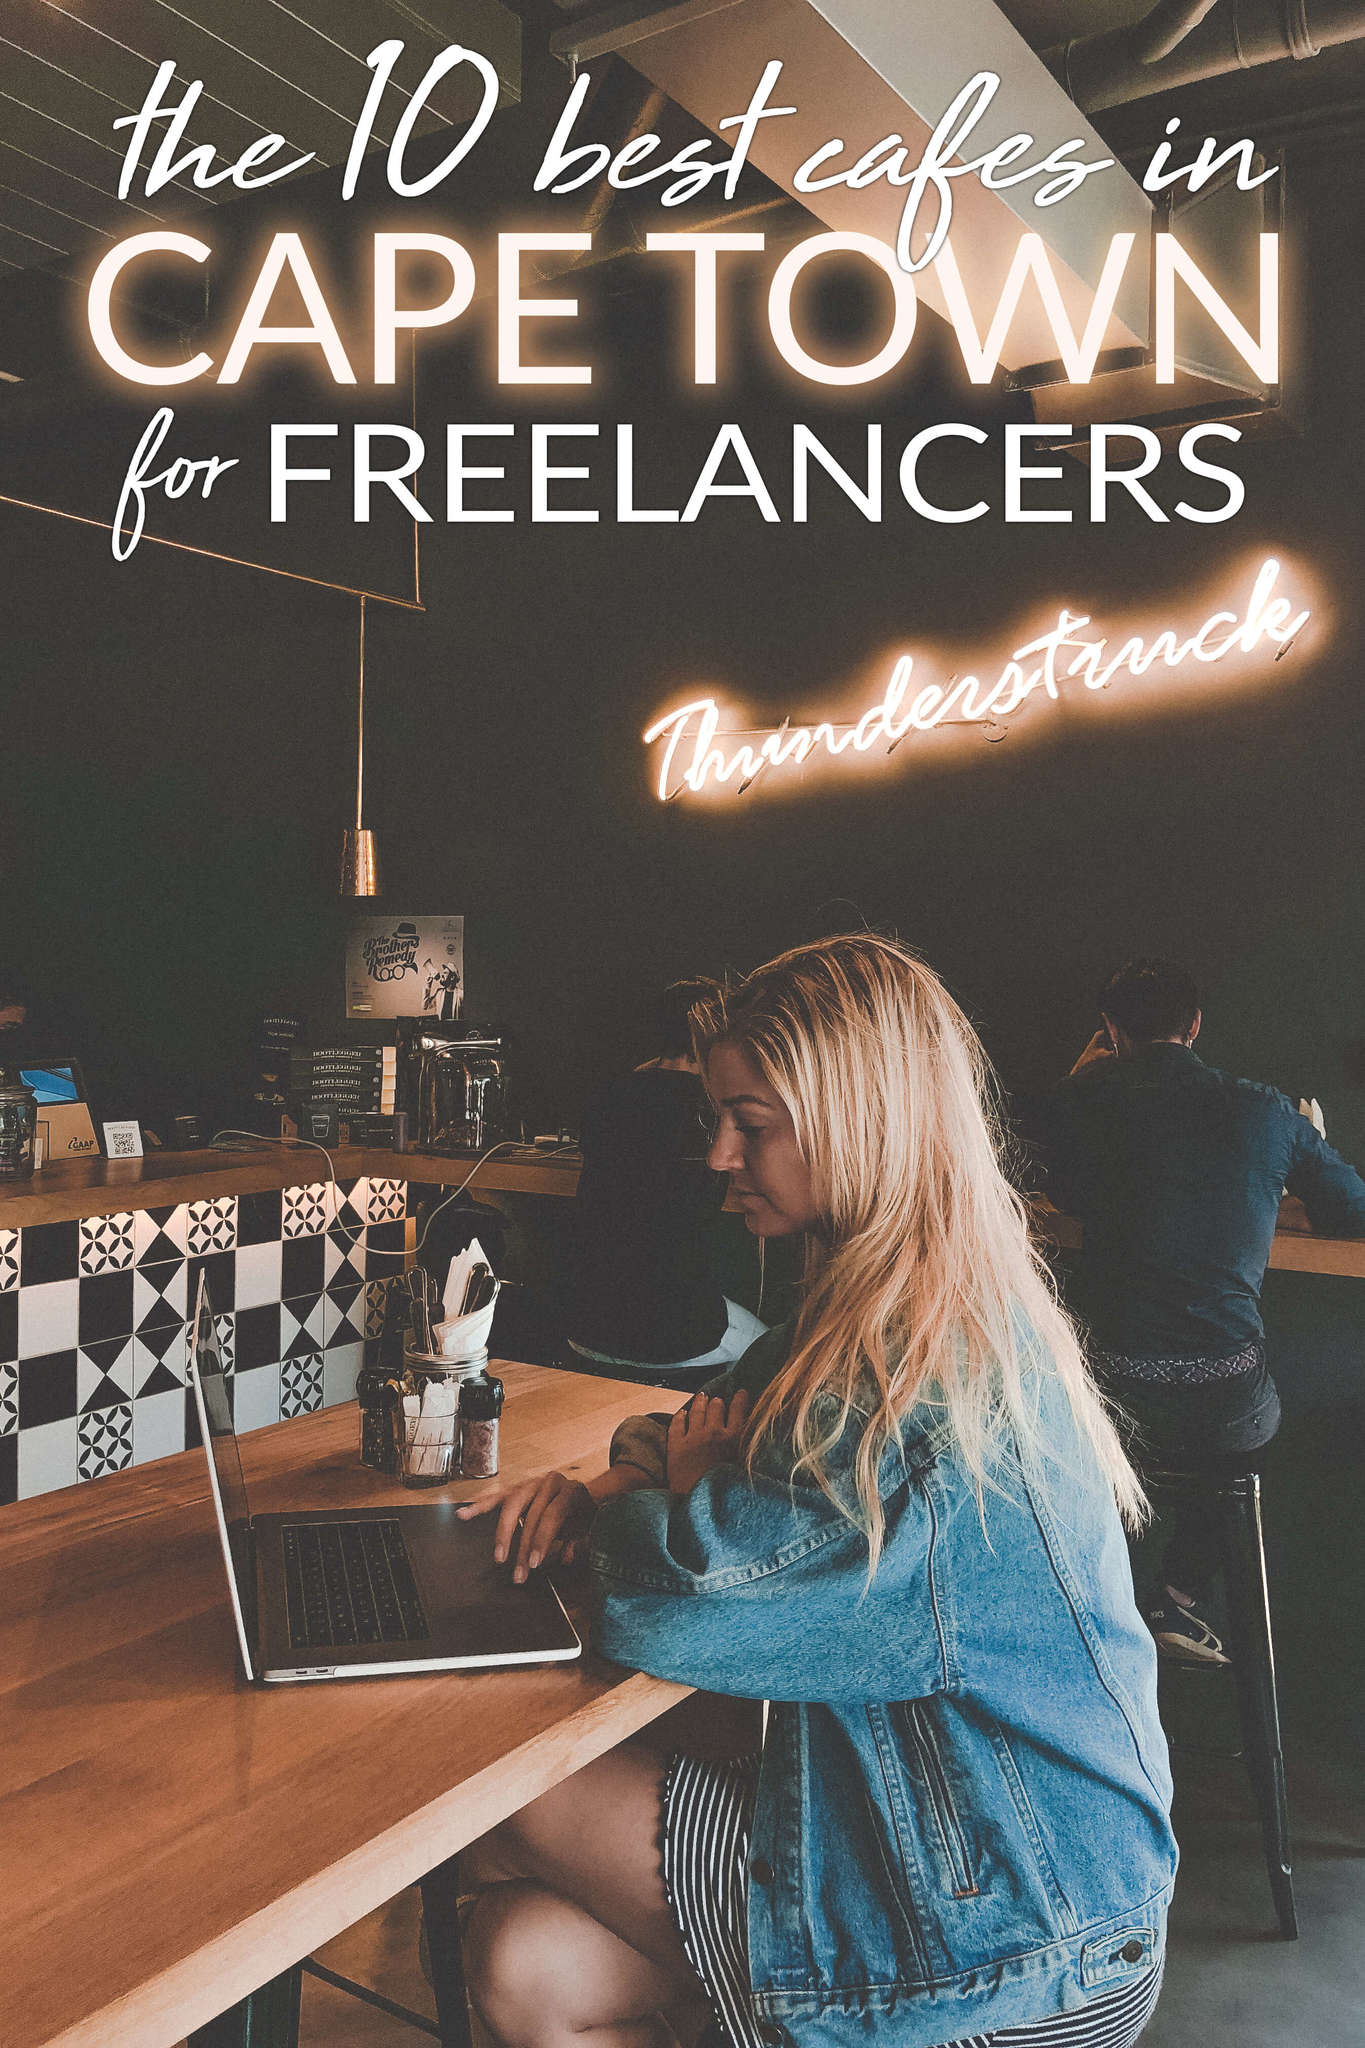 The 10 Best Cafes in Cape Town for Freelancers